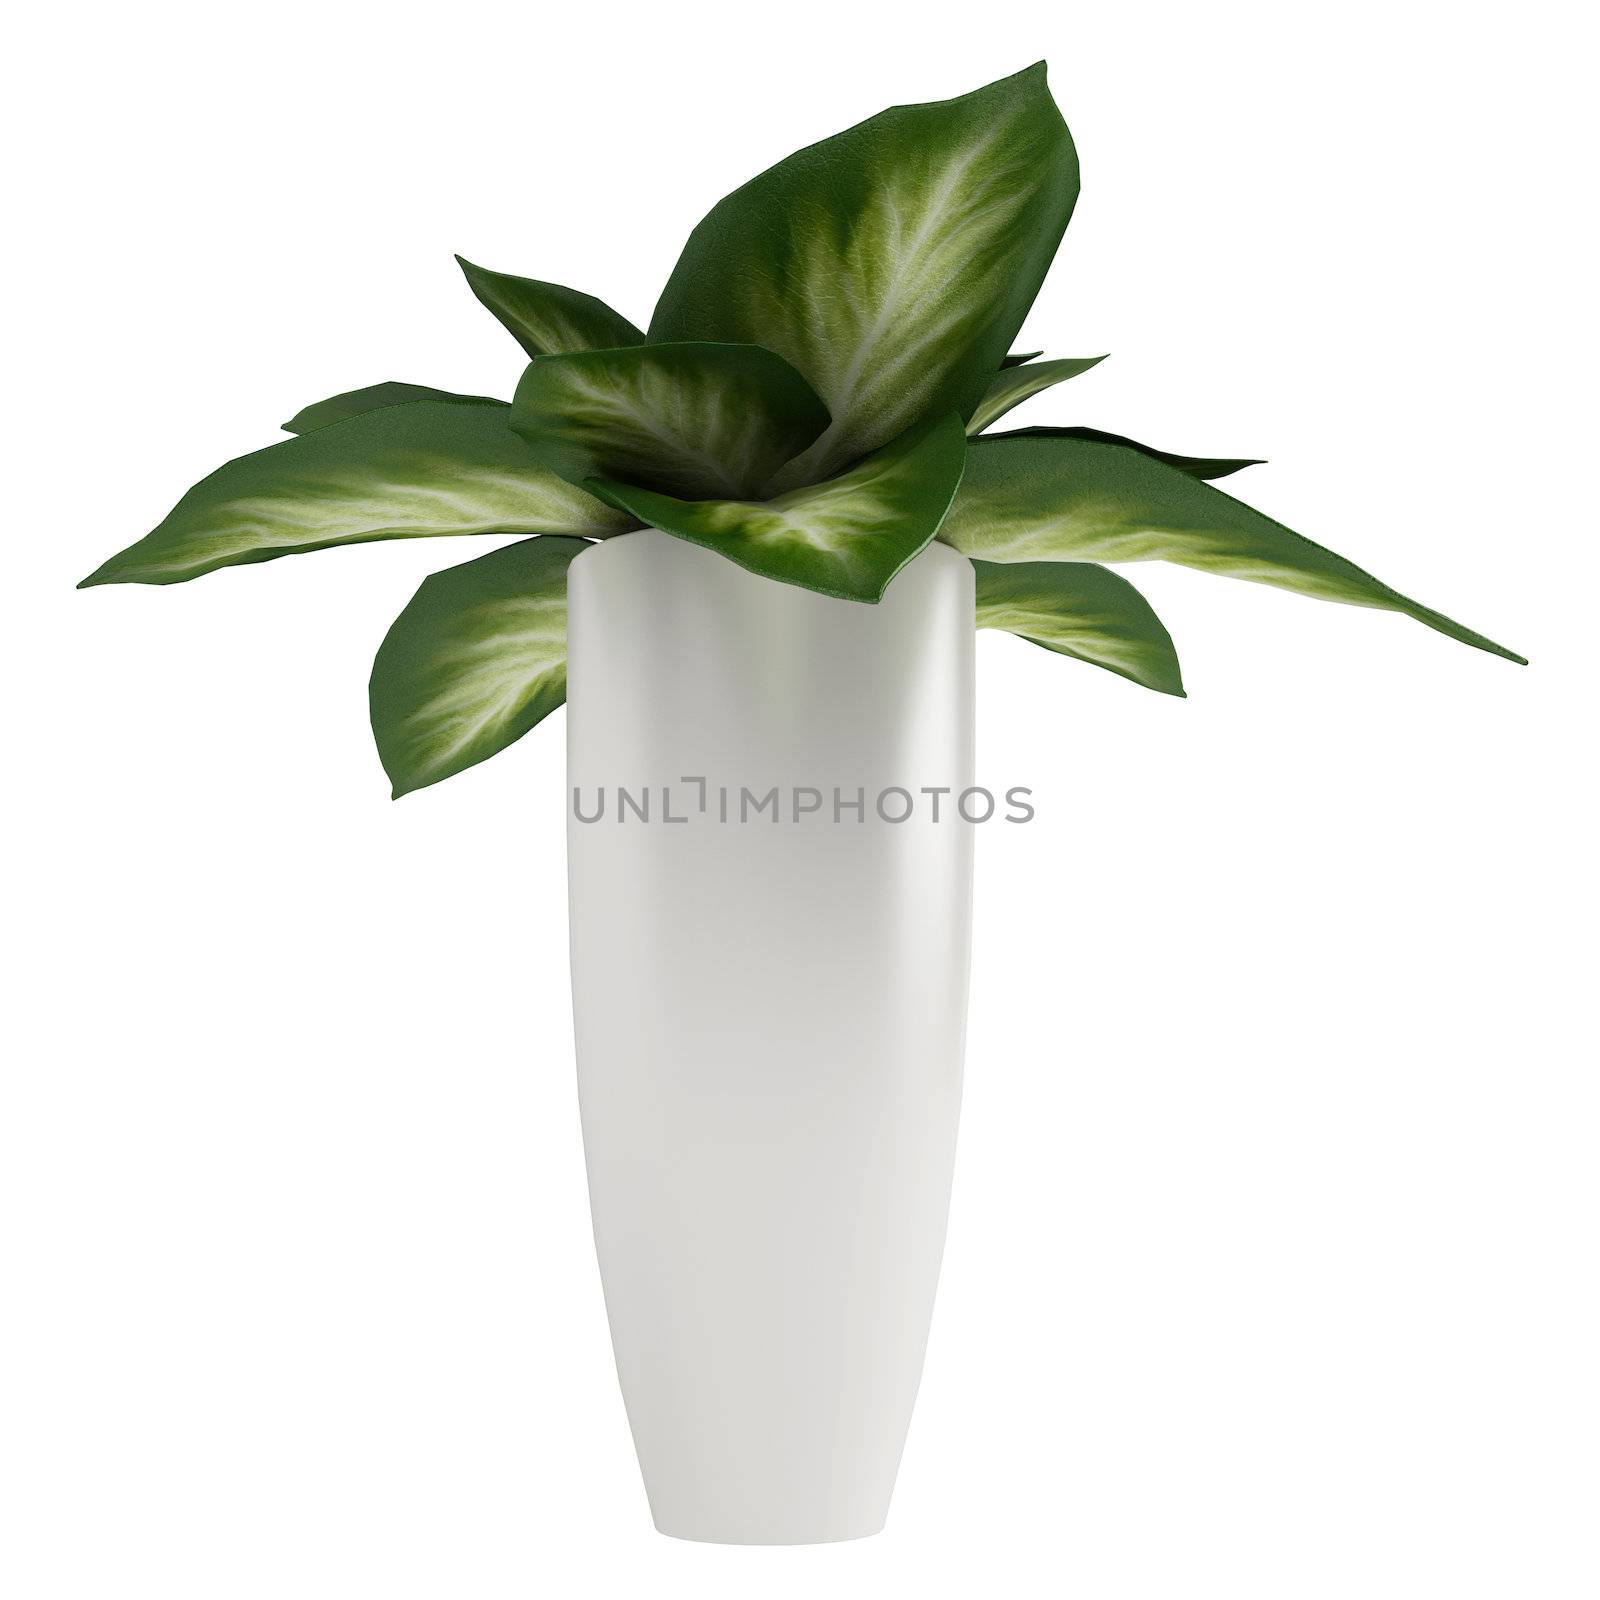 Variegated Dieffenbachia leaves in a tall cylindrical container isolated on white for use to decorate a home interior